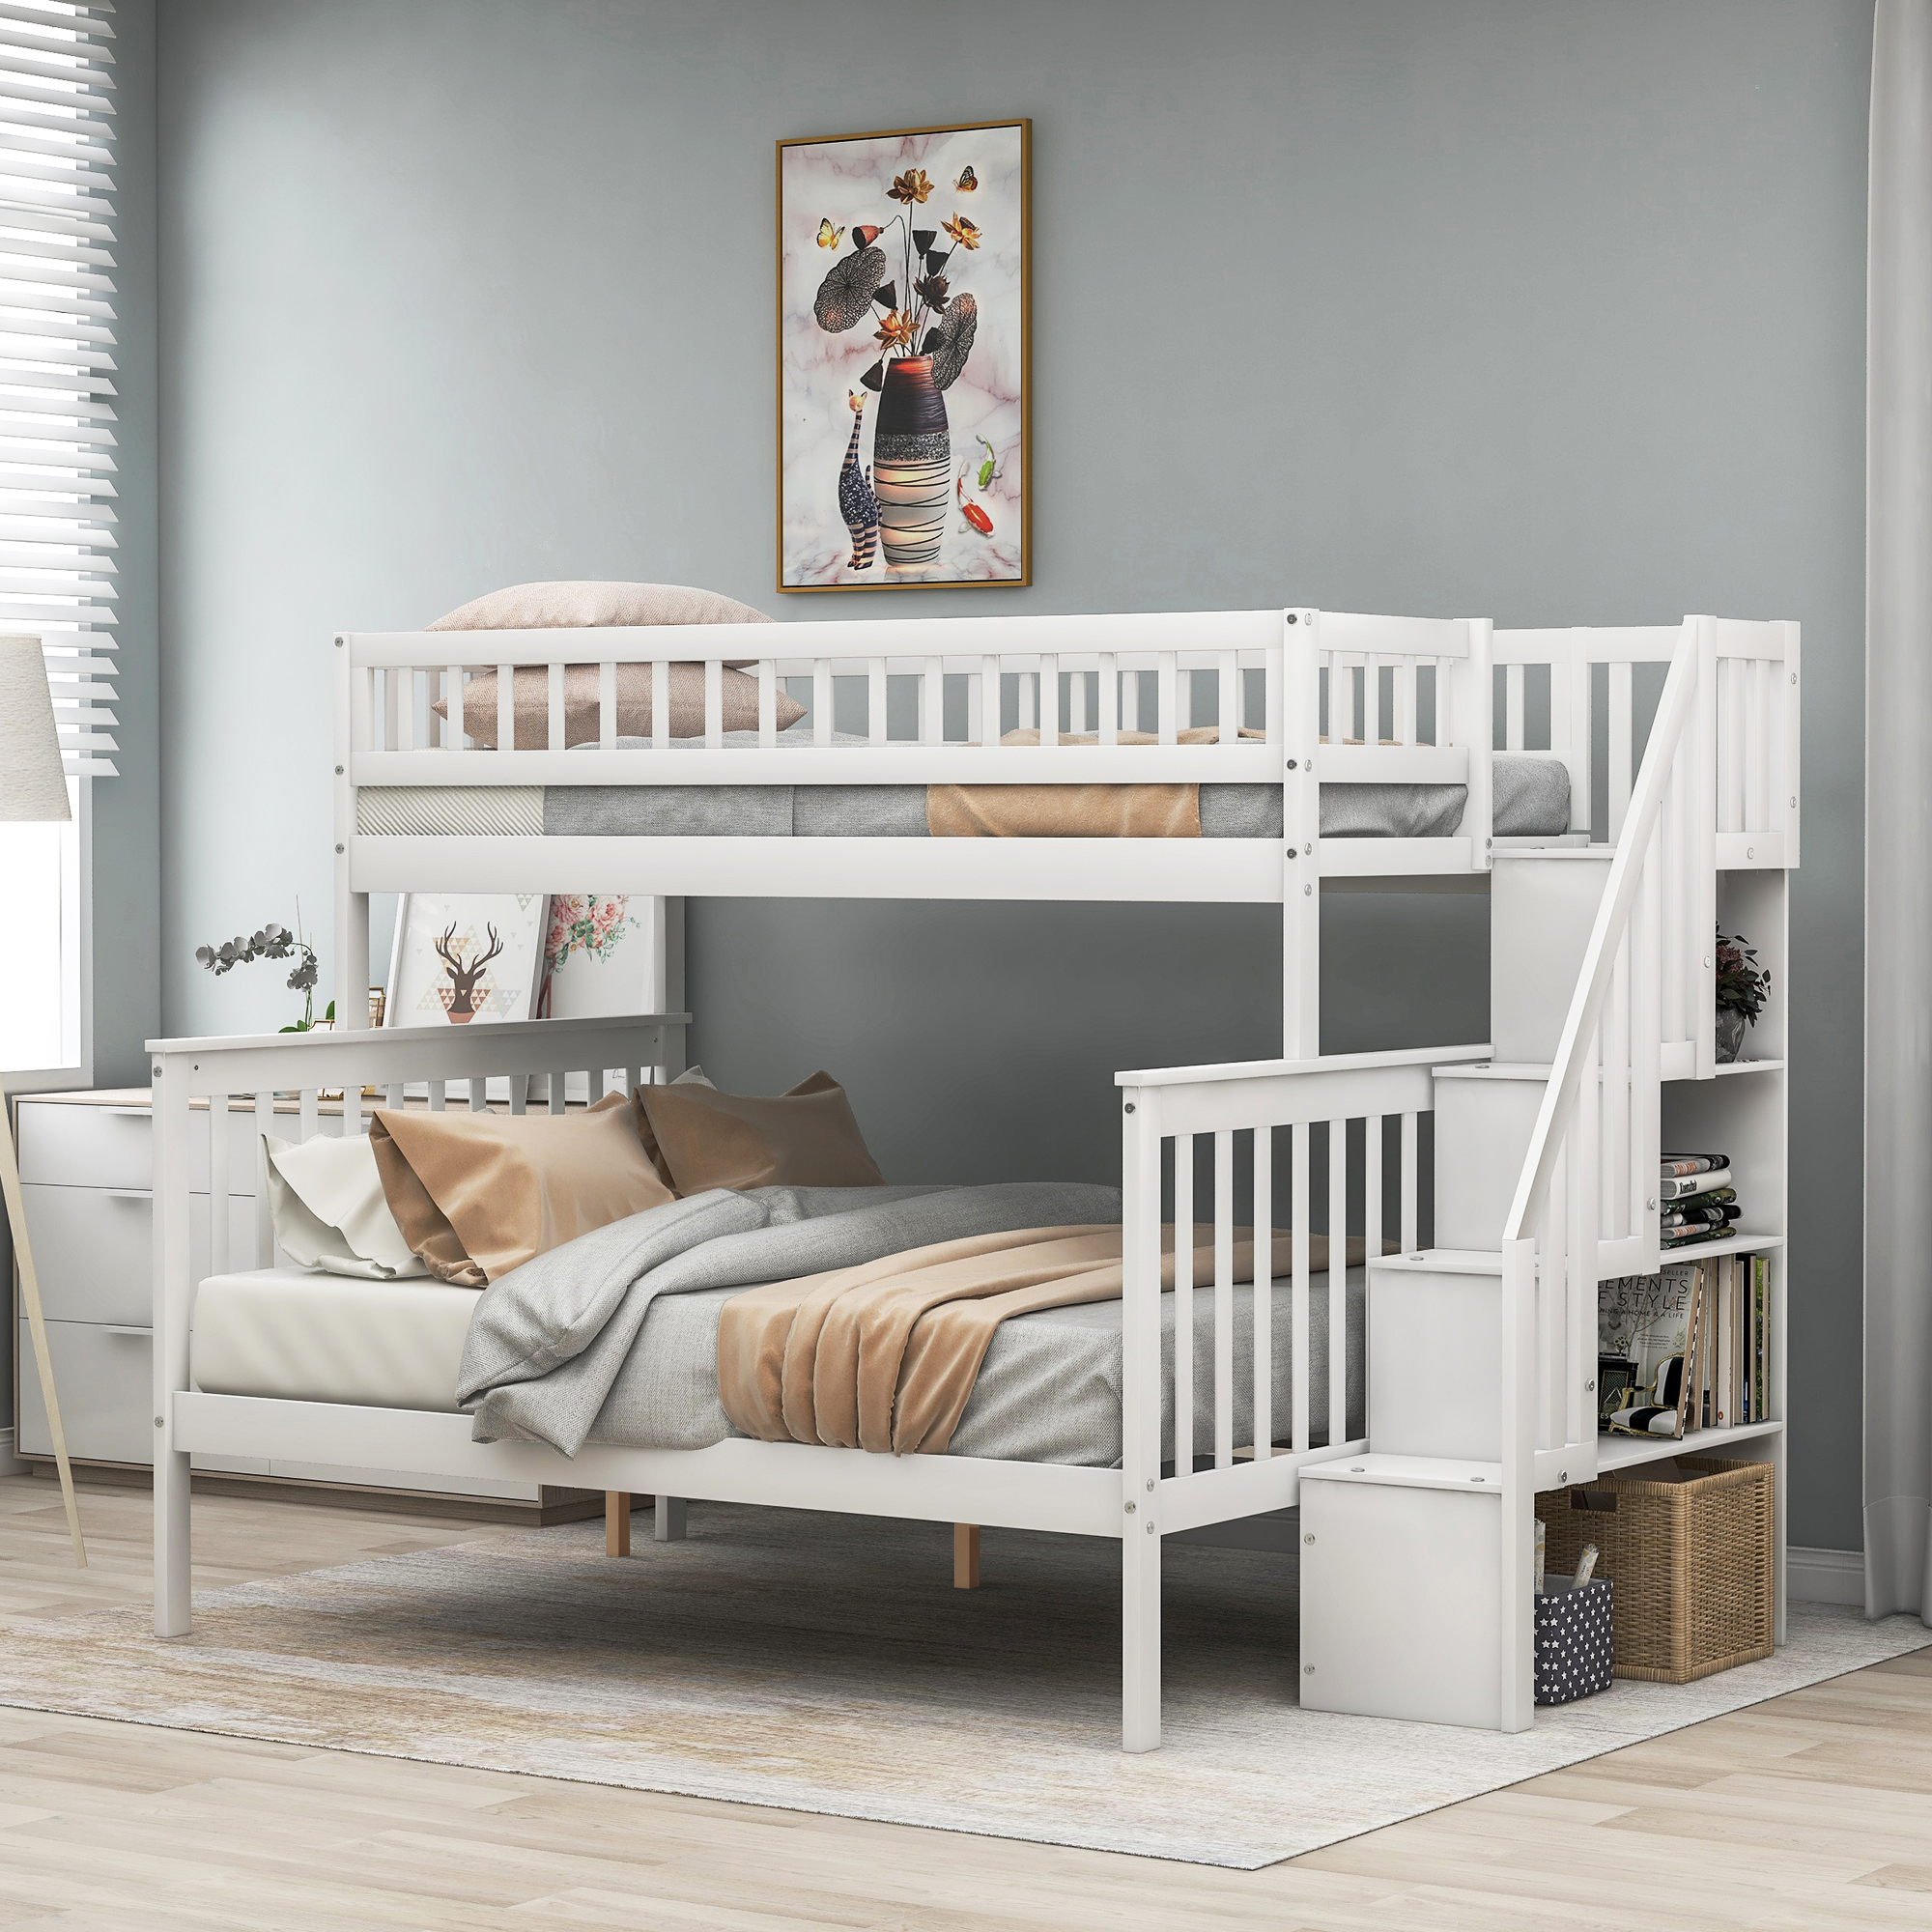 Twin over Full Stairway Bunk Bed with storage, White-CASAINC